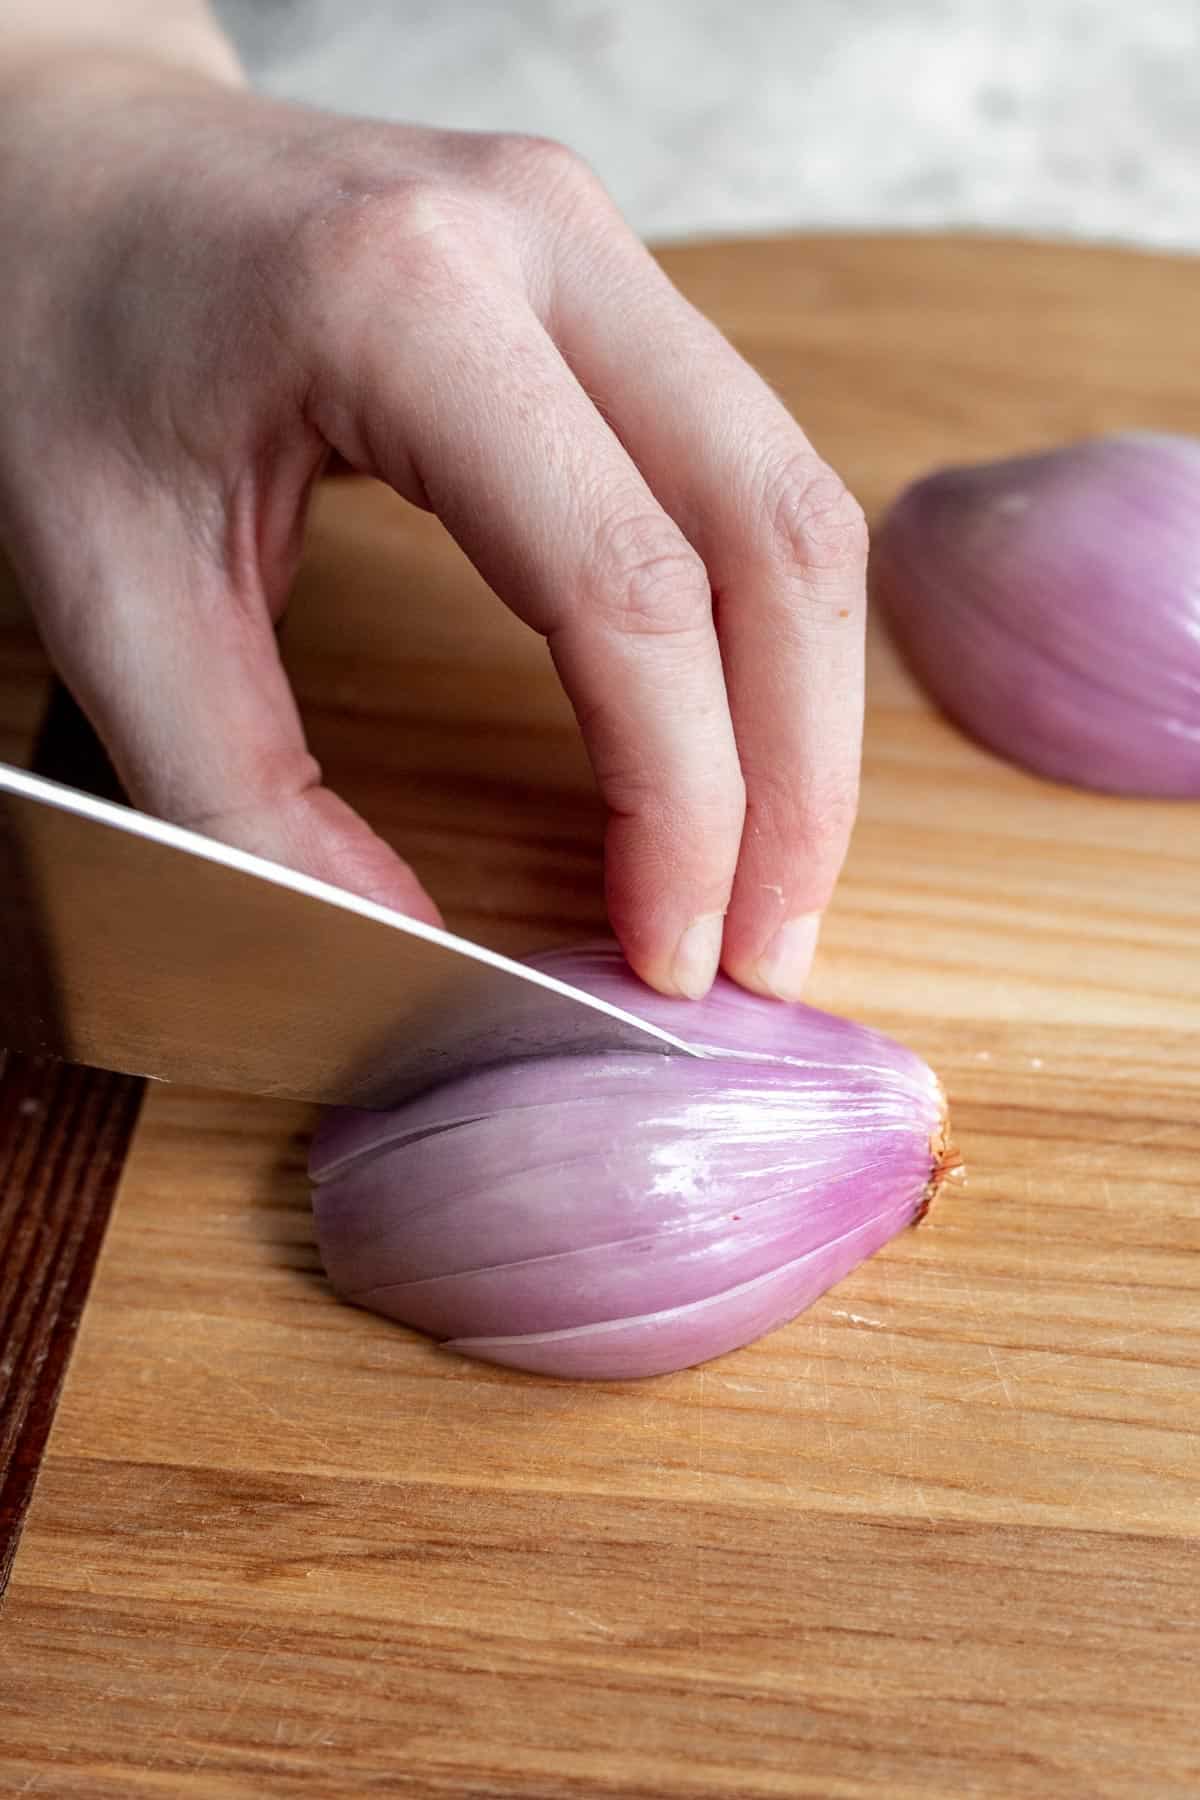 A chef's knife slicing a shallot without cutting through the shallot's root end.